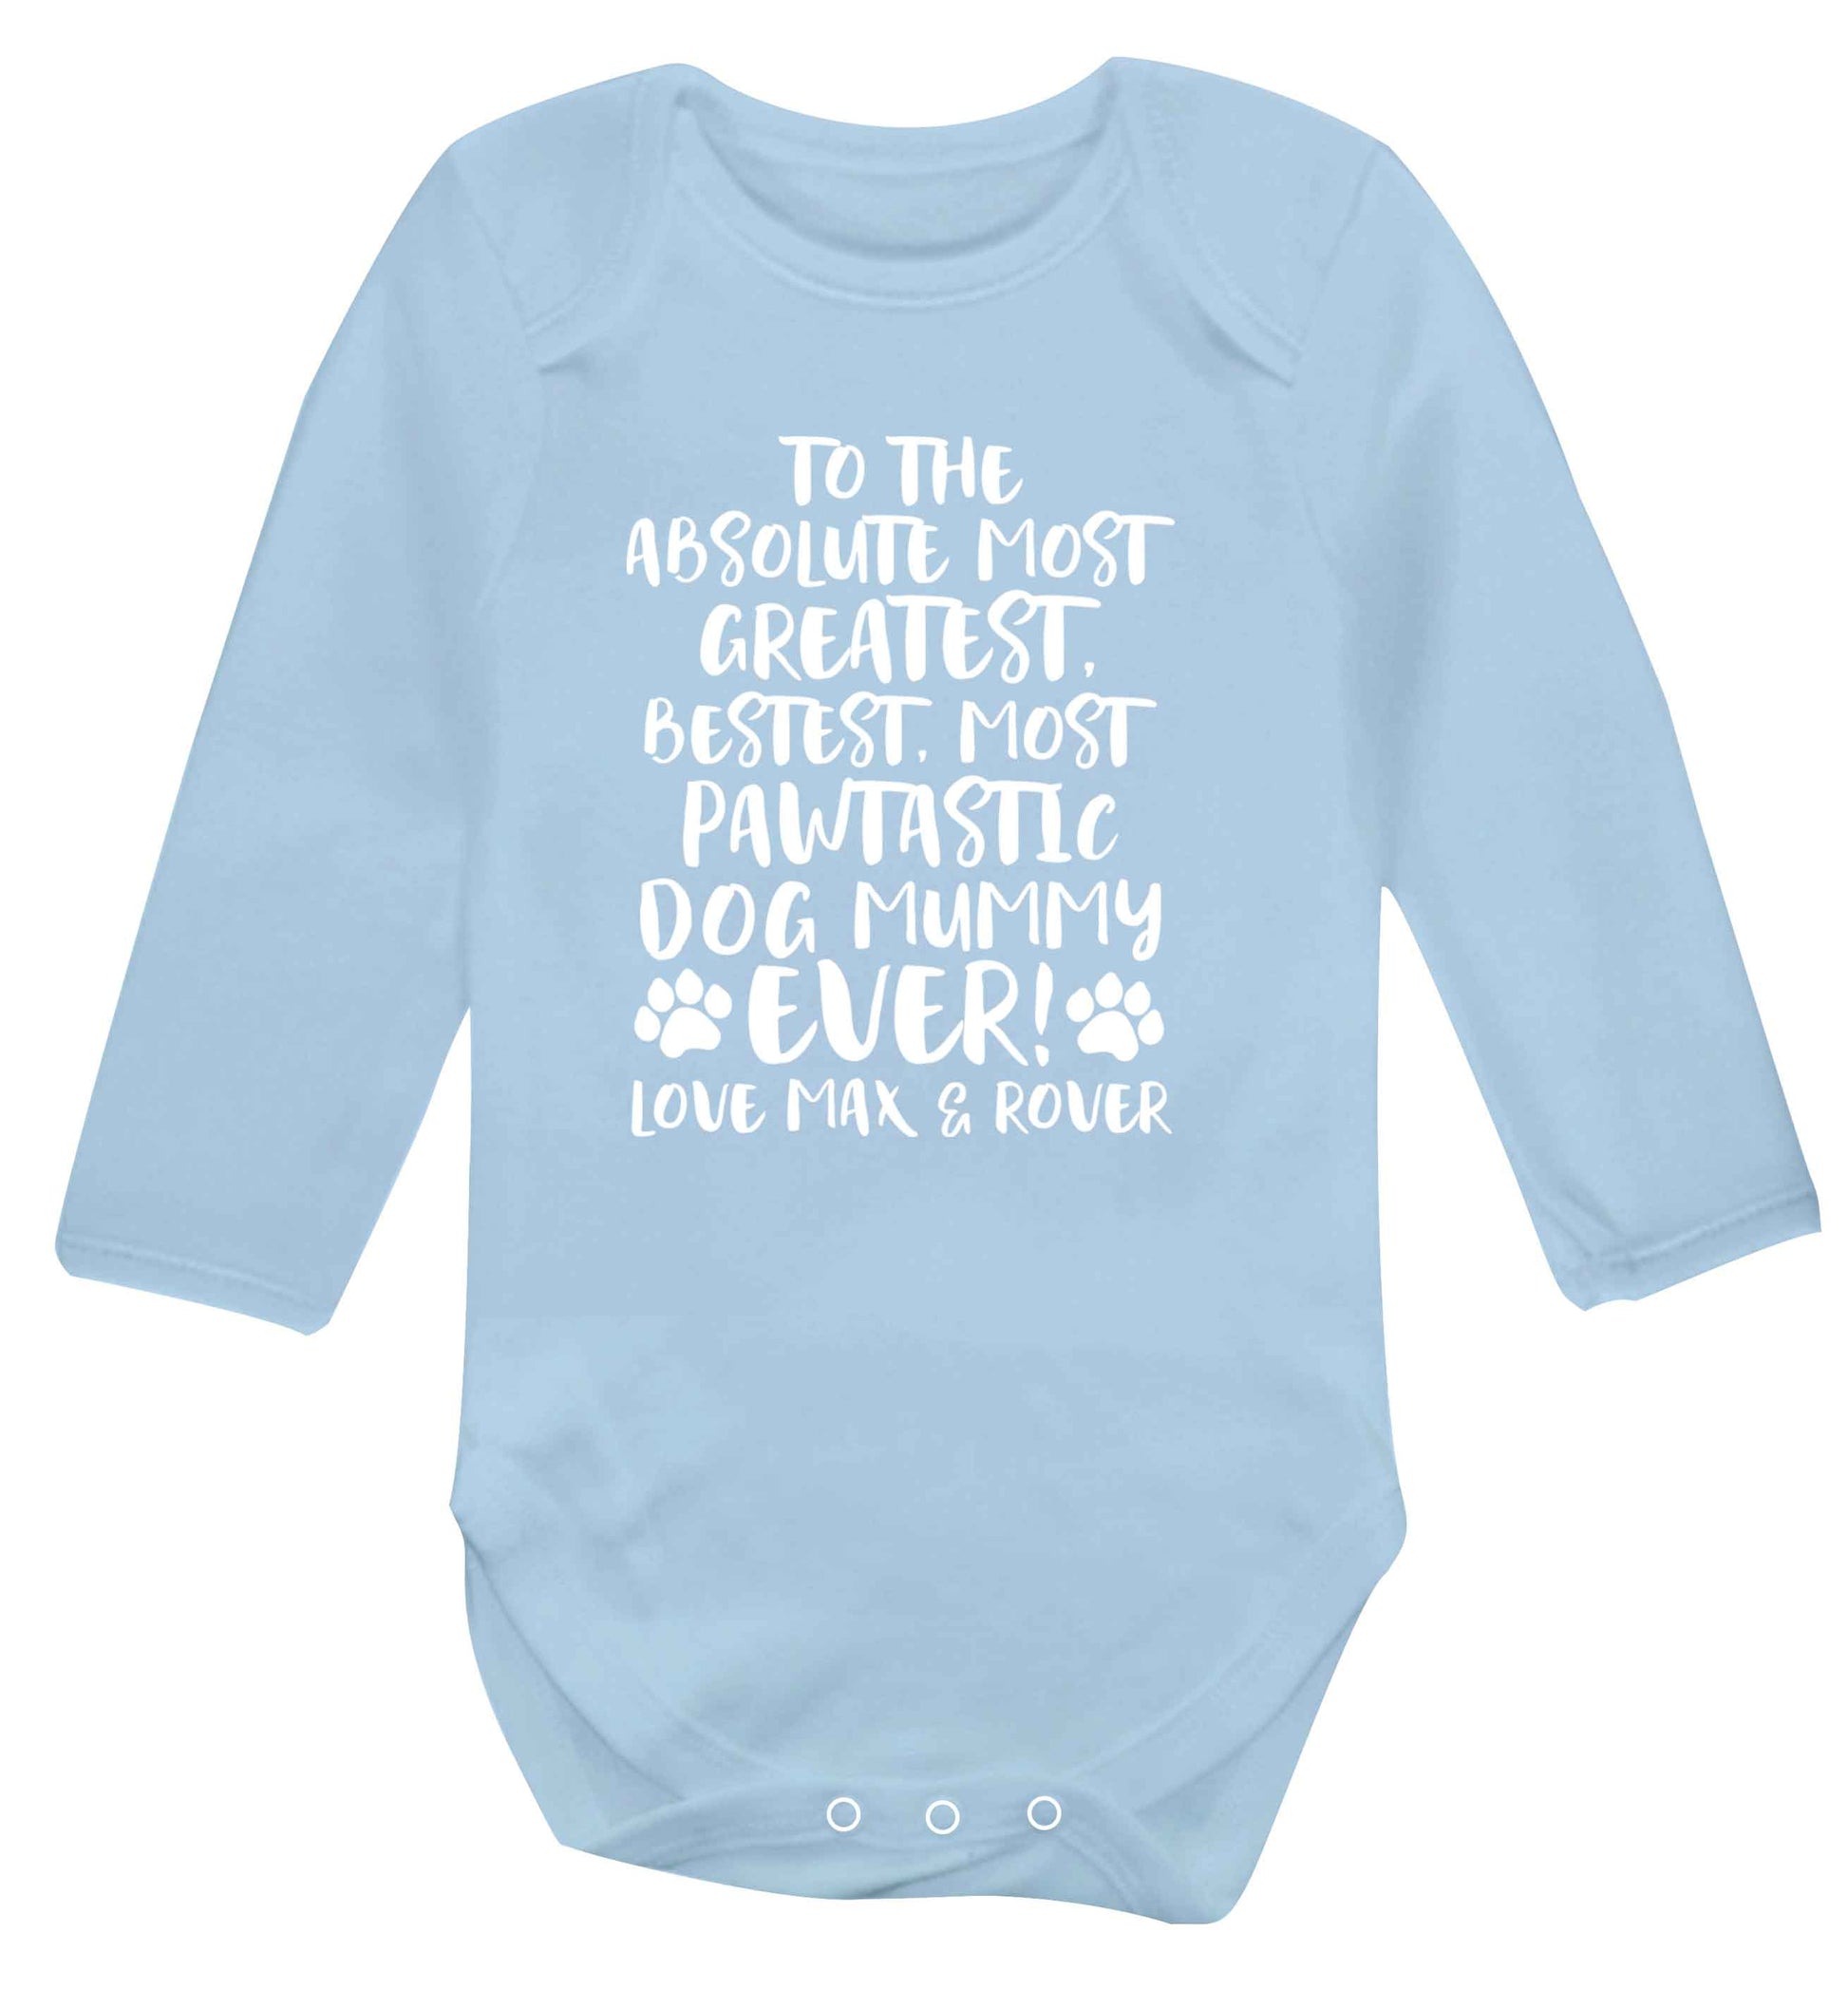 Personalsied to the most pawtastic dog mummy ever Baby Vest long sleeved pale blue 6-12 months